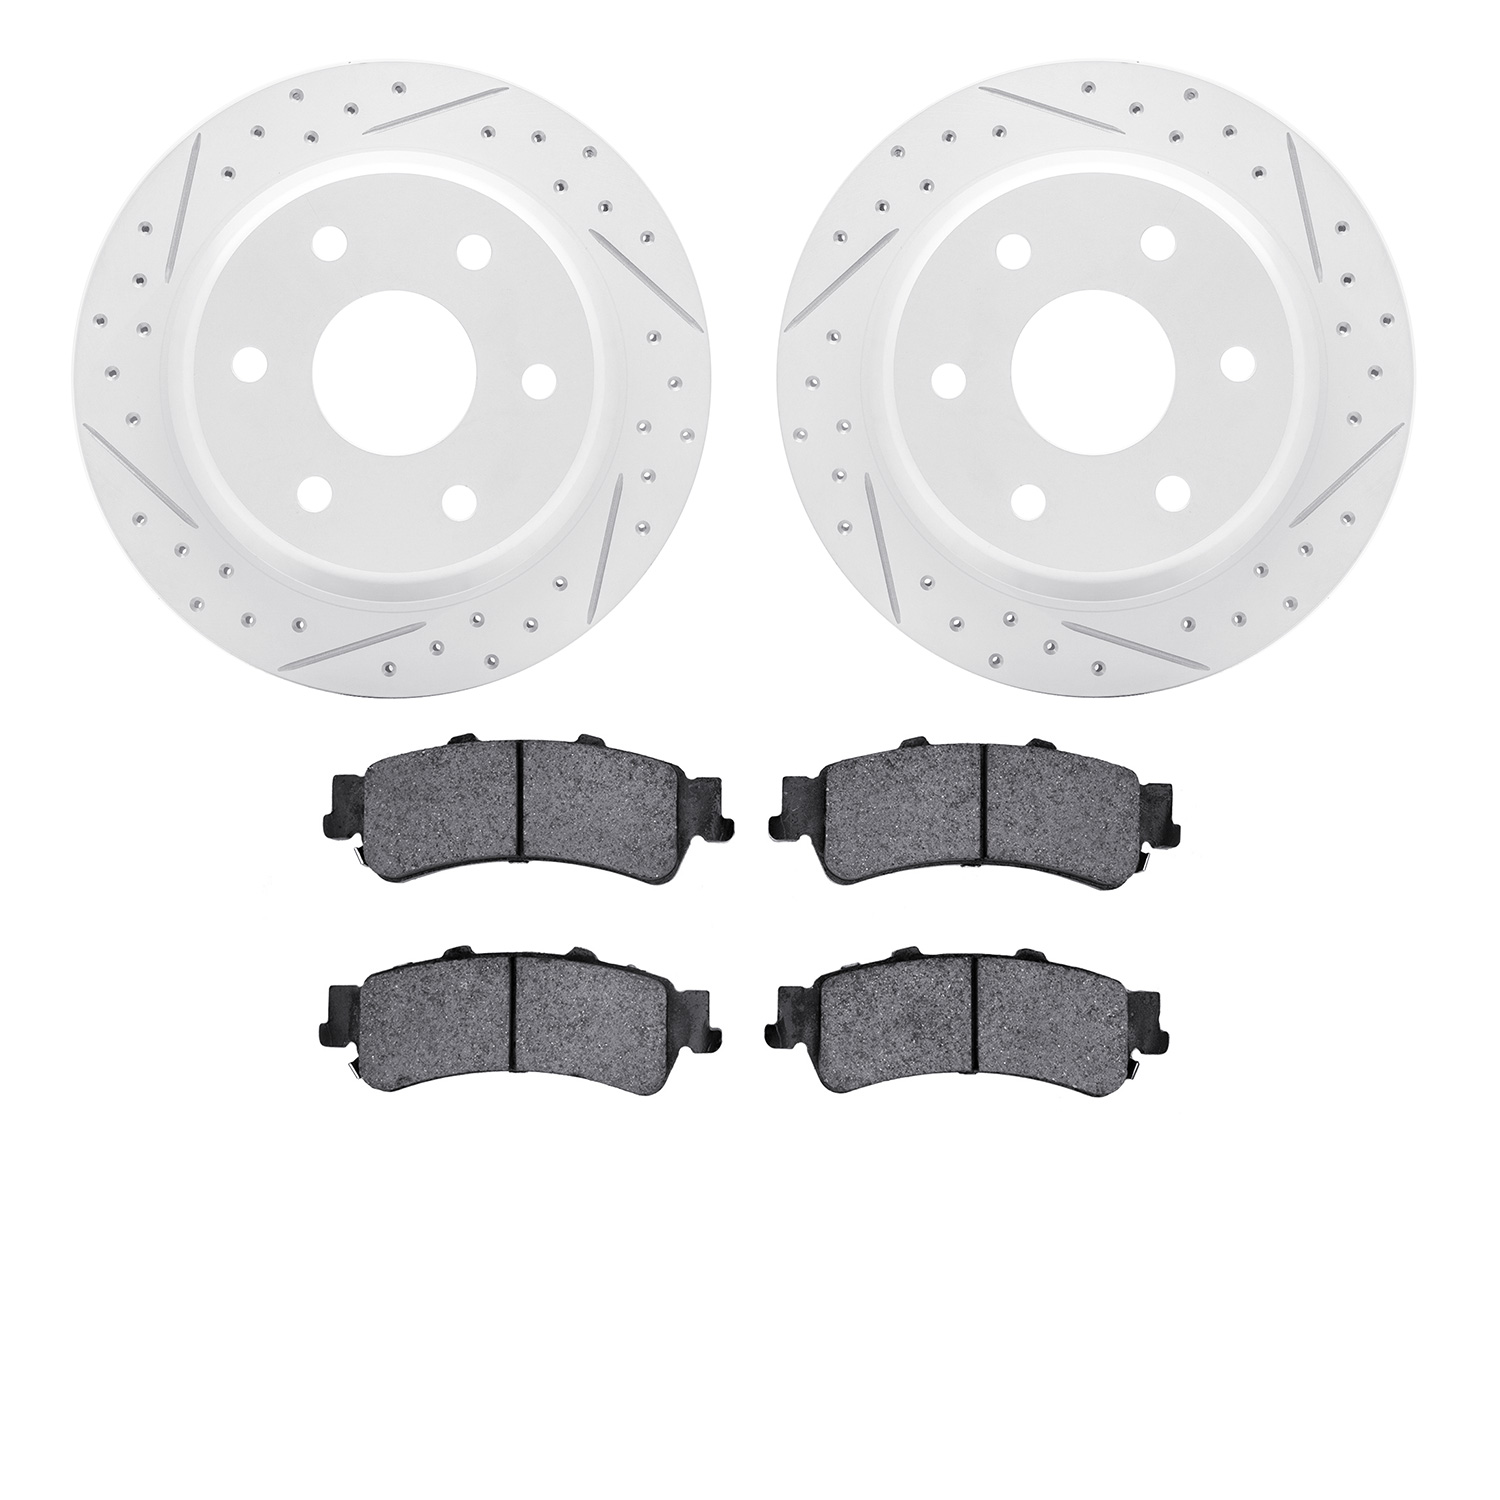 2202-48010 Geoperformance Drilled/Slotted Rotors w/Heavy-Duty Pads Kit, 1999-2007 GM, Position: Rear